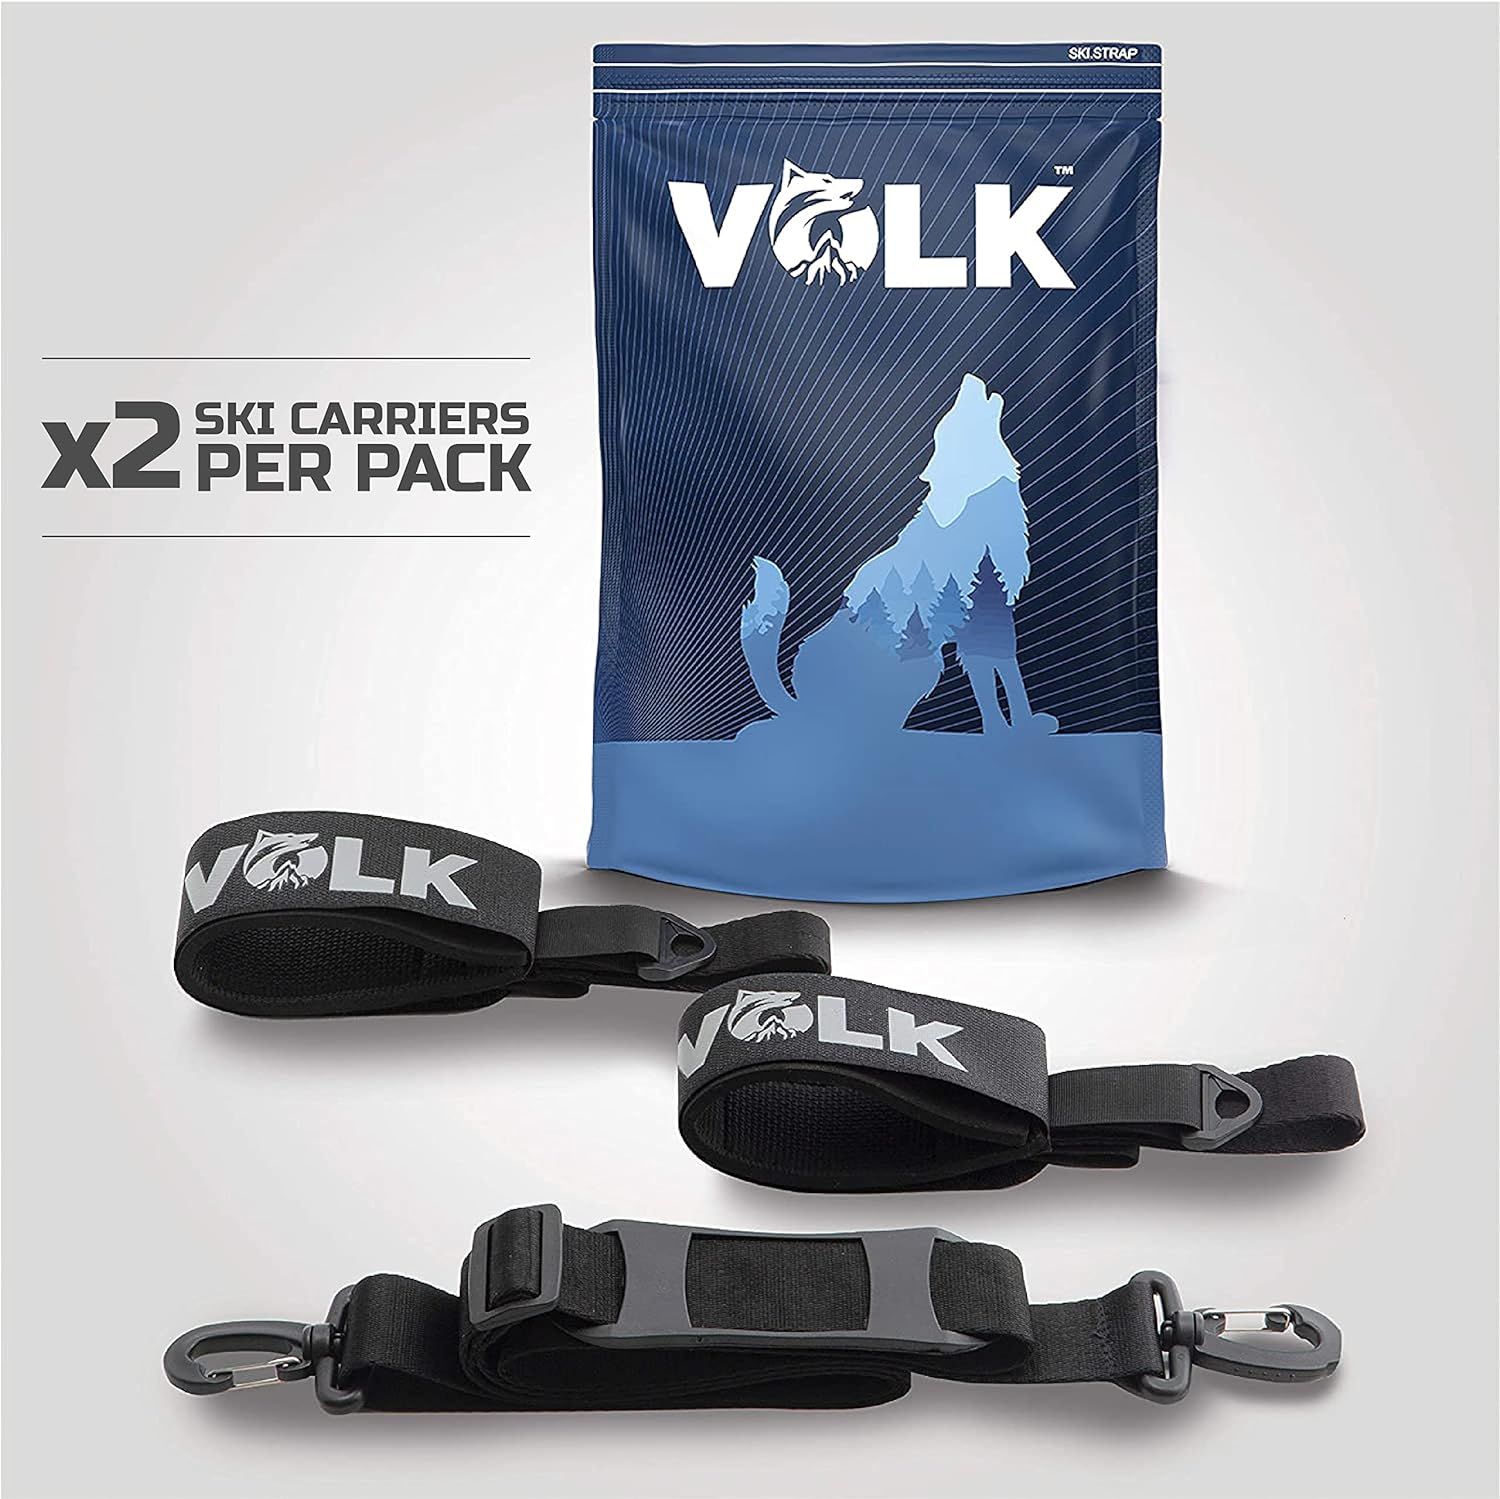 Volk Ski Strap and Pole Carrier - 2 Sets per Pack - Skiing Accessory for Easy Transportation of Your | Amazon (US)